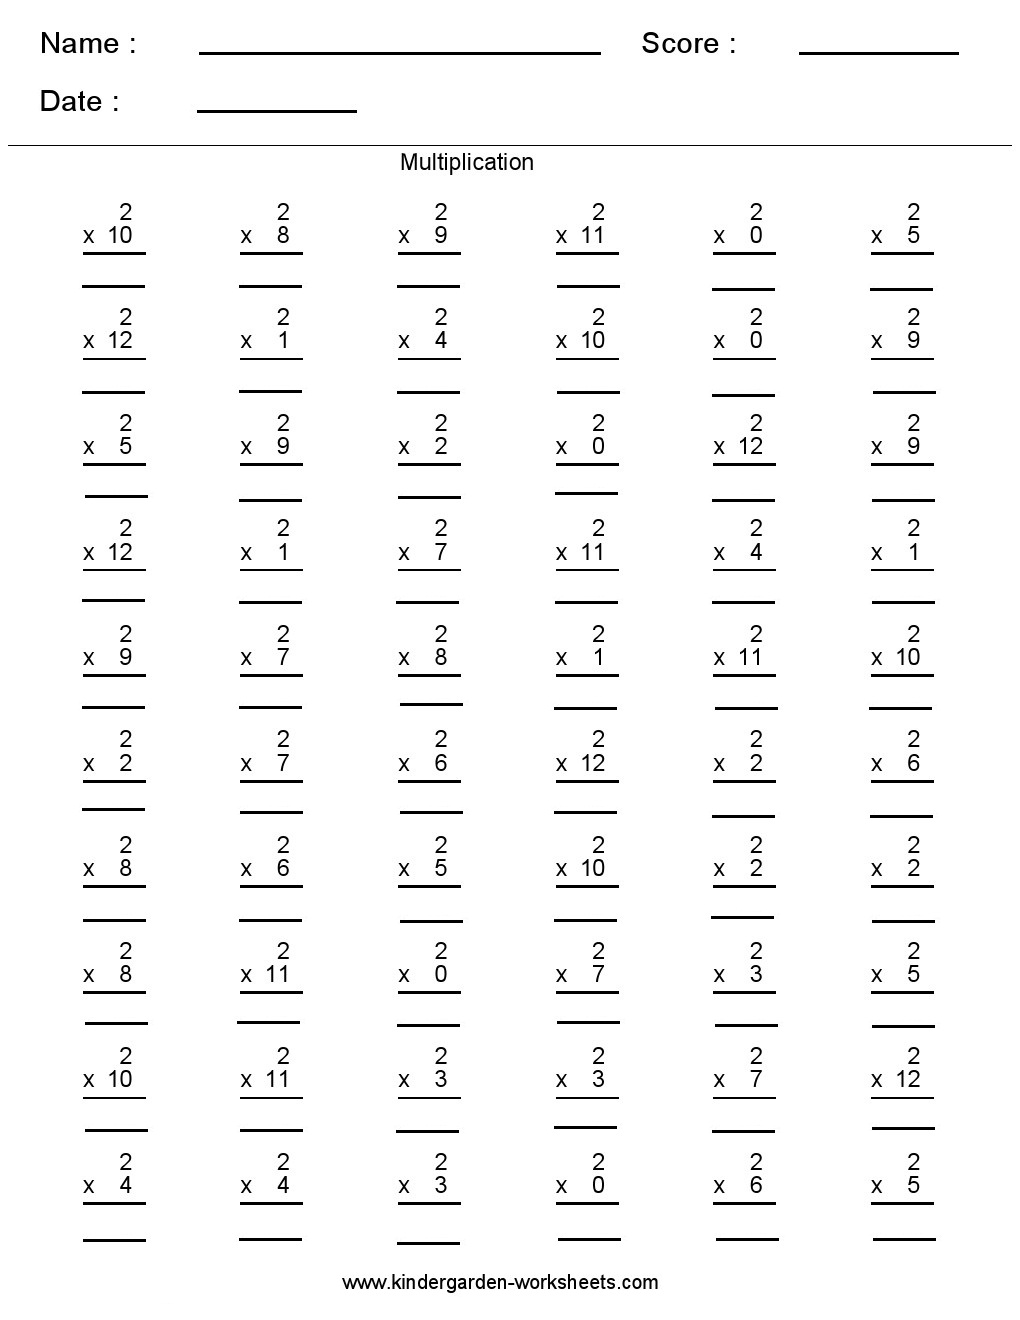 Multiplication Facts Worksheets For 5th Grade